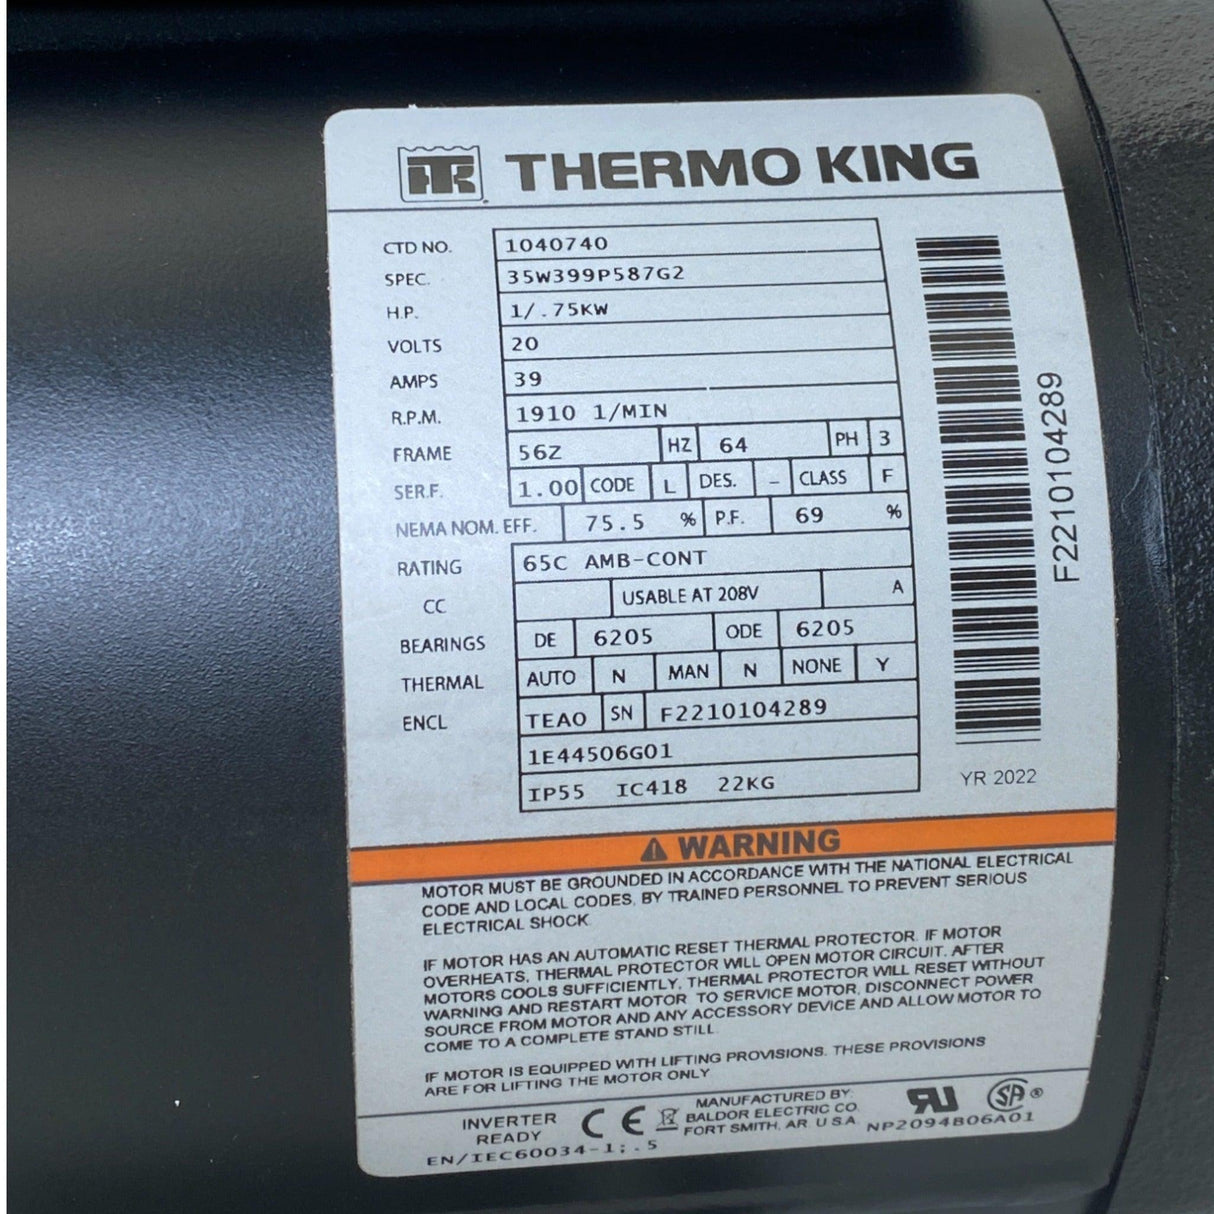 1040740 Thermo King Condencer Fan Motor - Truck To Trailer